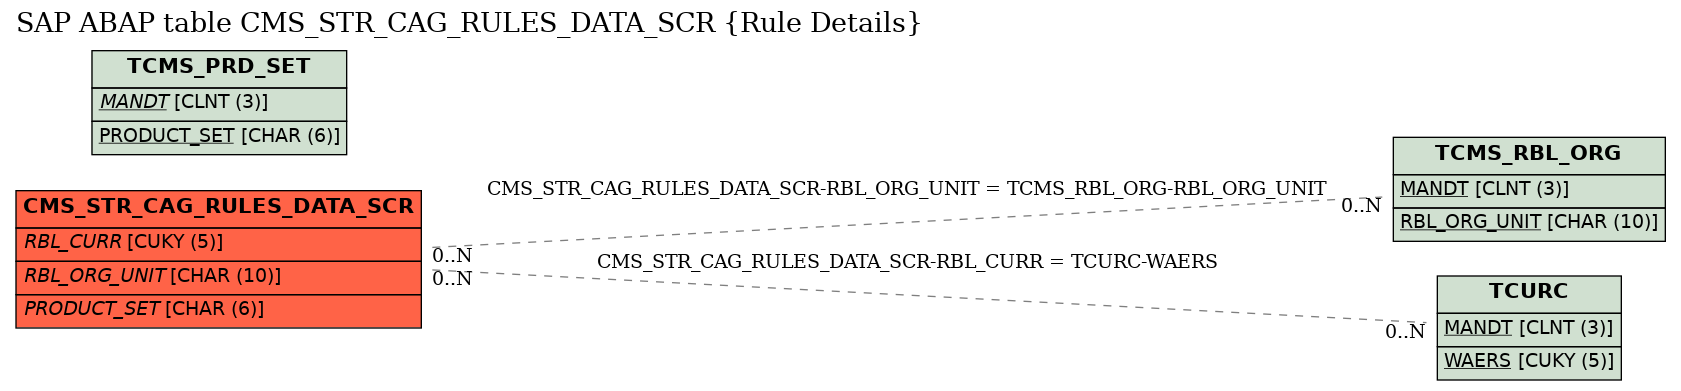 E-R Diagram for table CMS_STR_CAG_RULES_DATA_SCR (Rule Details)